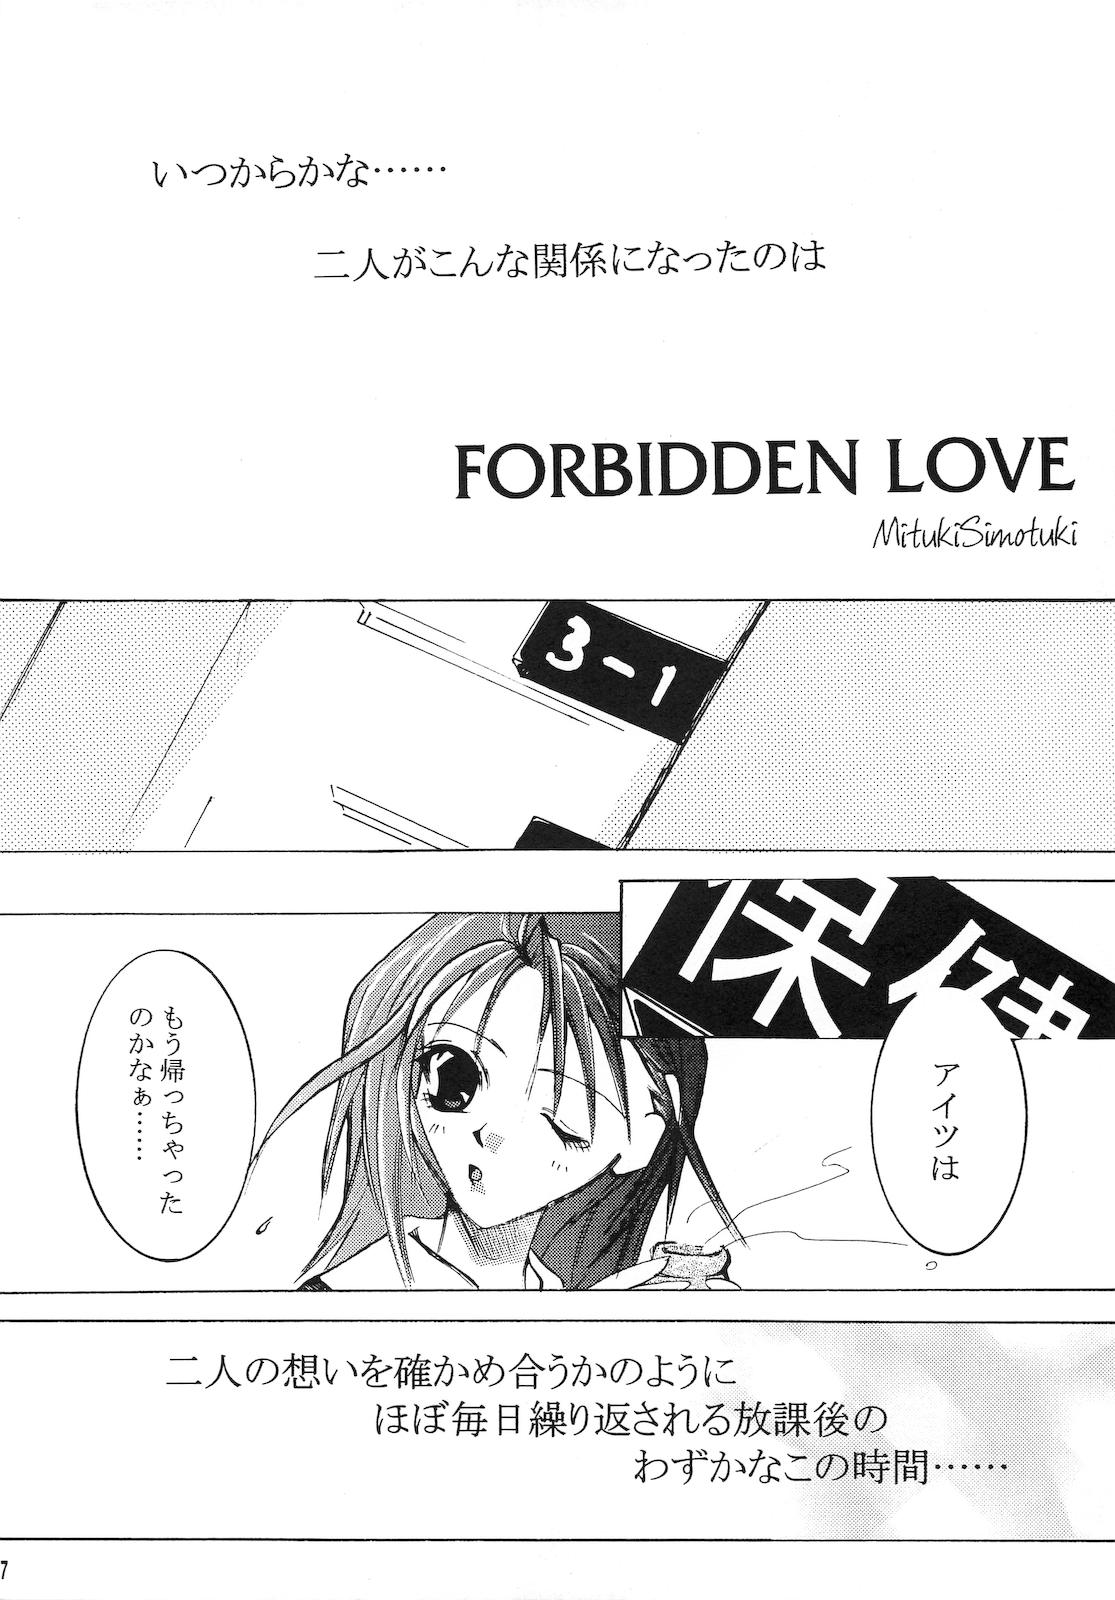 Class Forbidden Love - With you Sola - Page 6